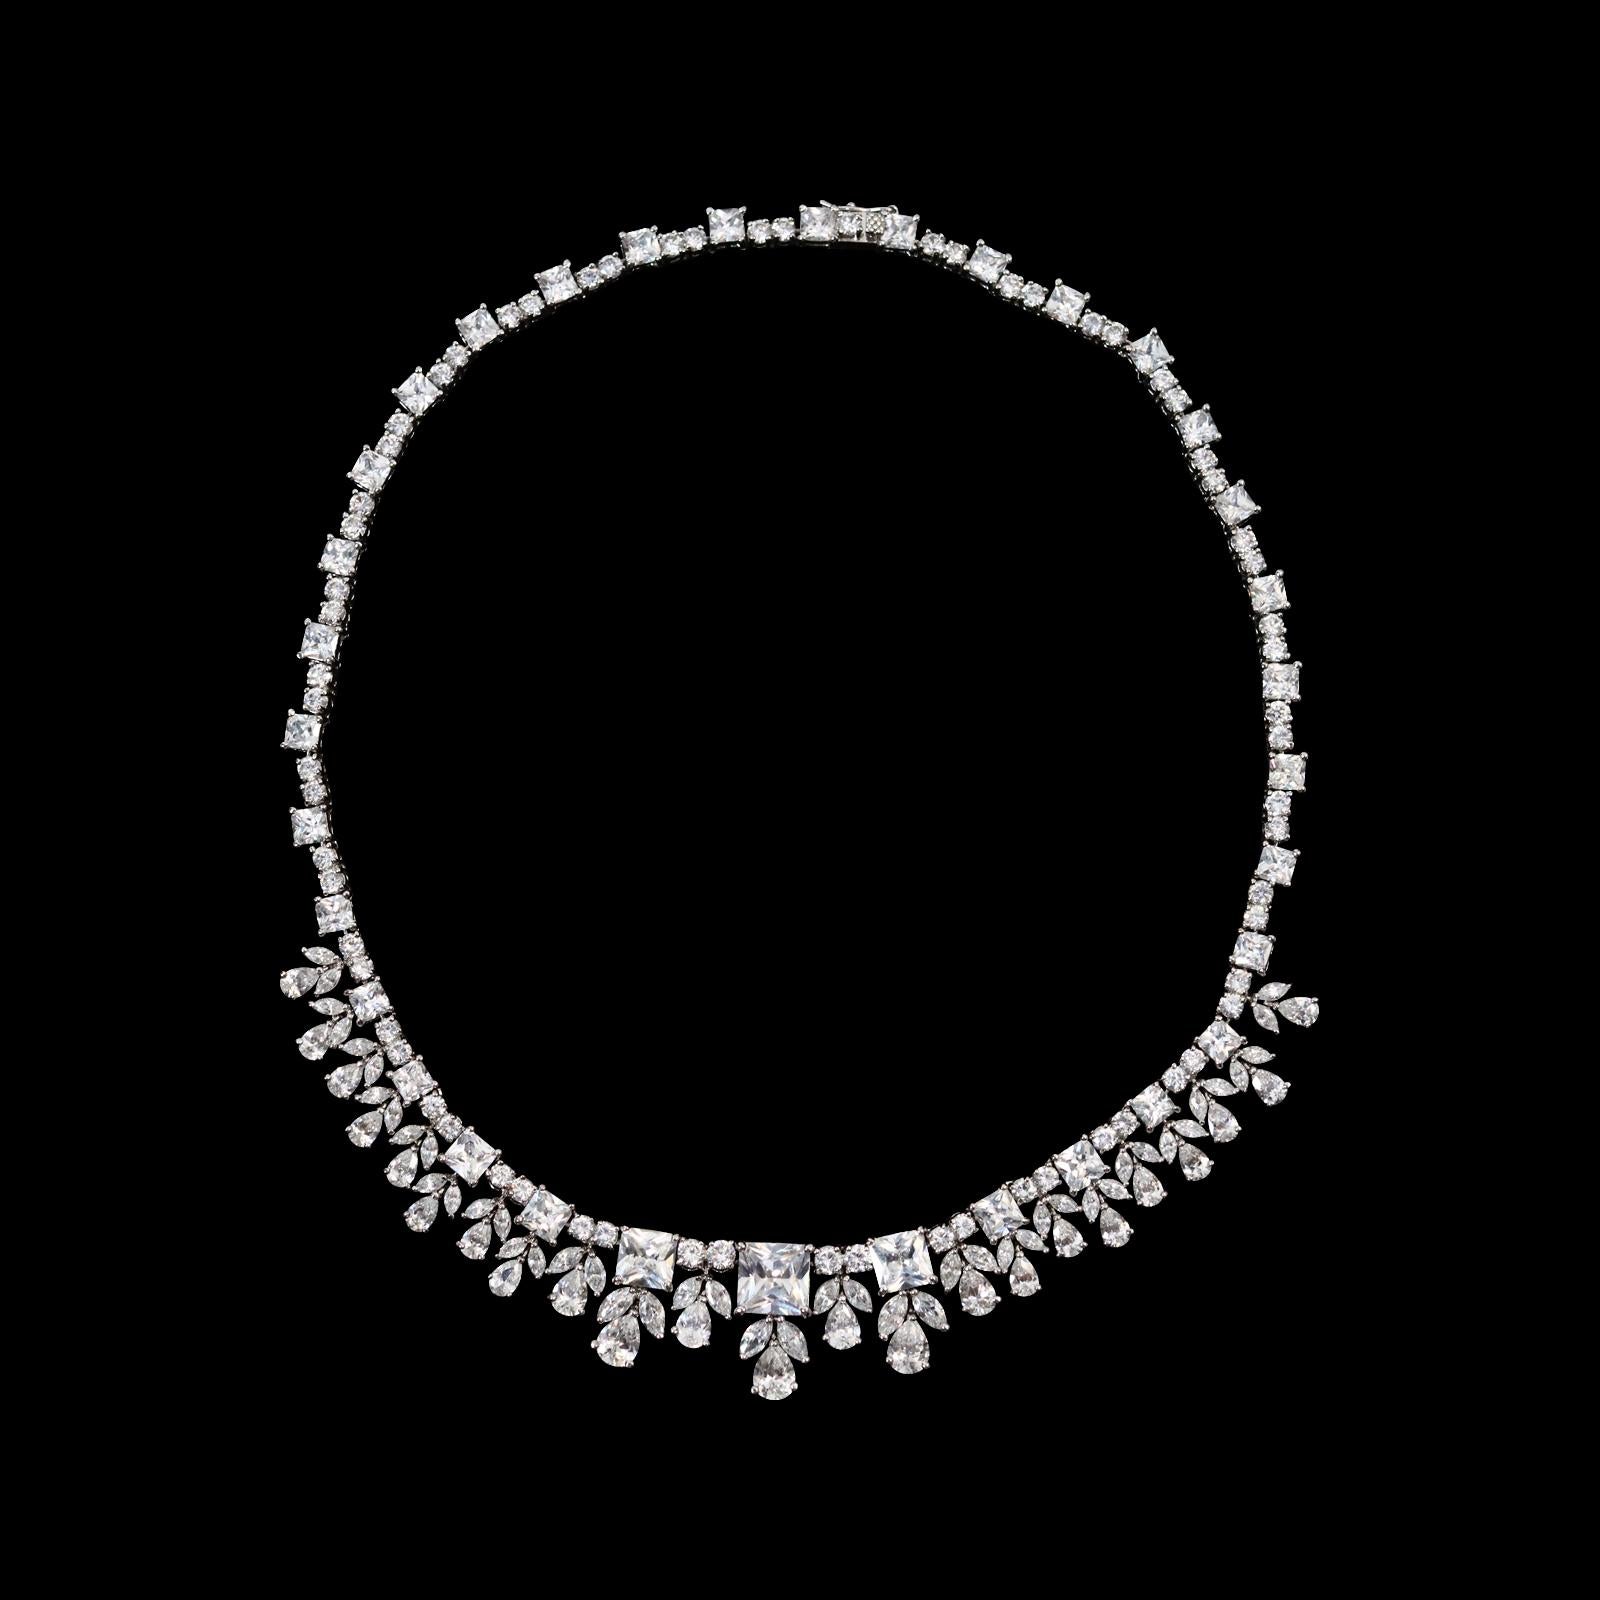 Vintage Diamante Dangling Pieces Necklace Circa 1990s In Excellent Condition For Sale In New York, NY